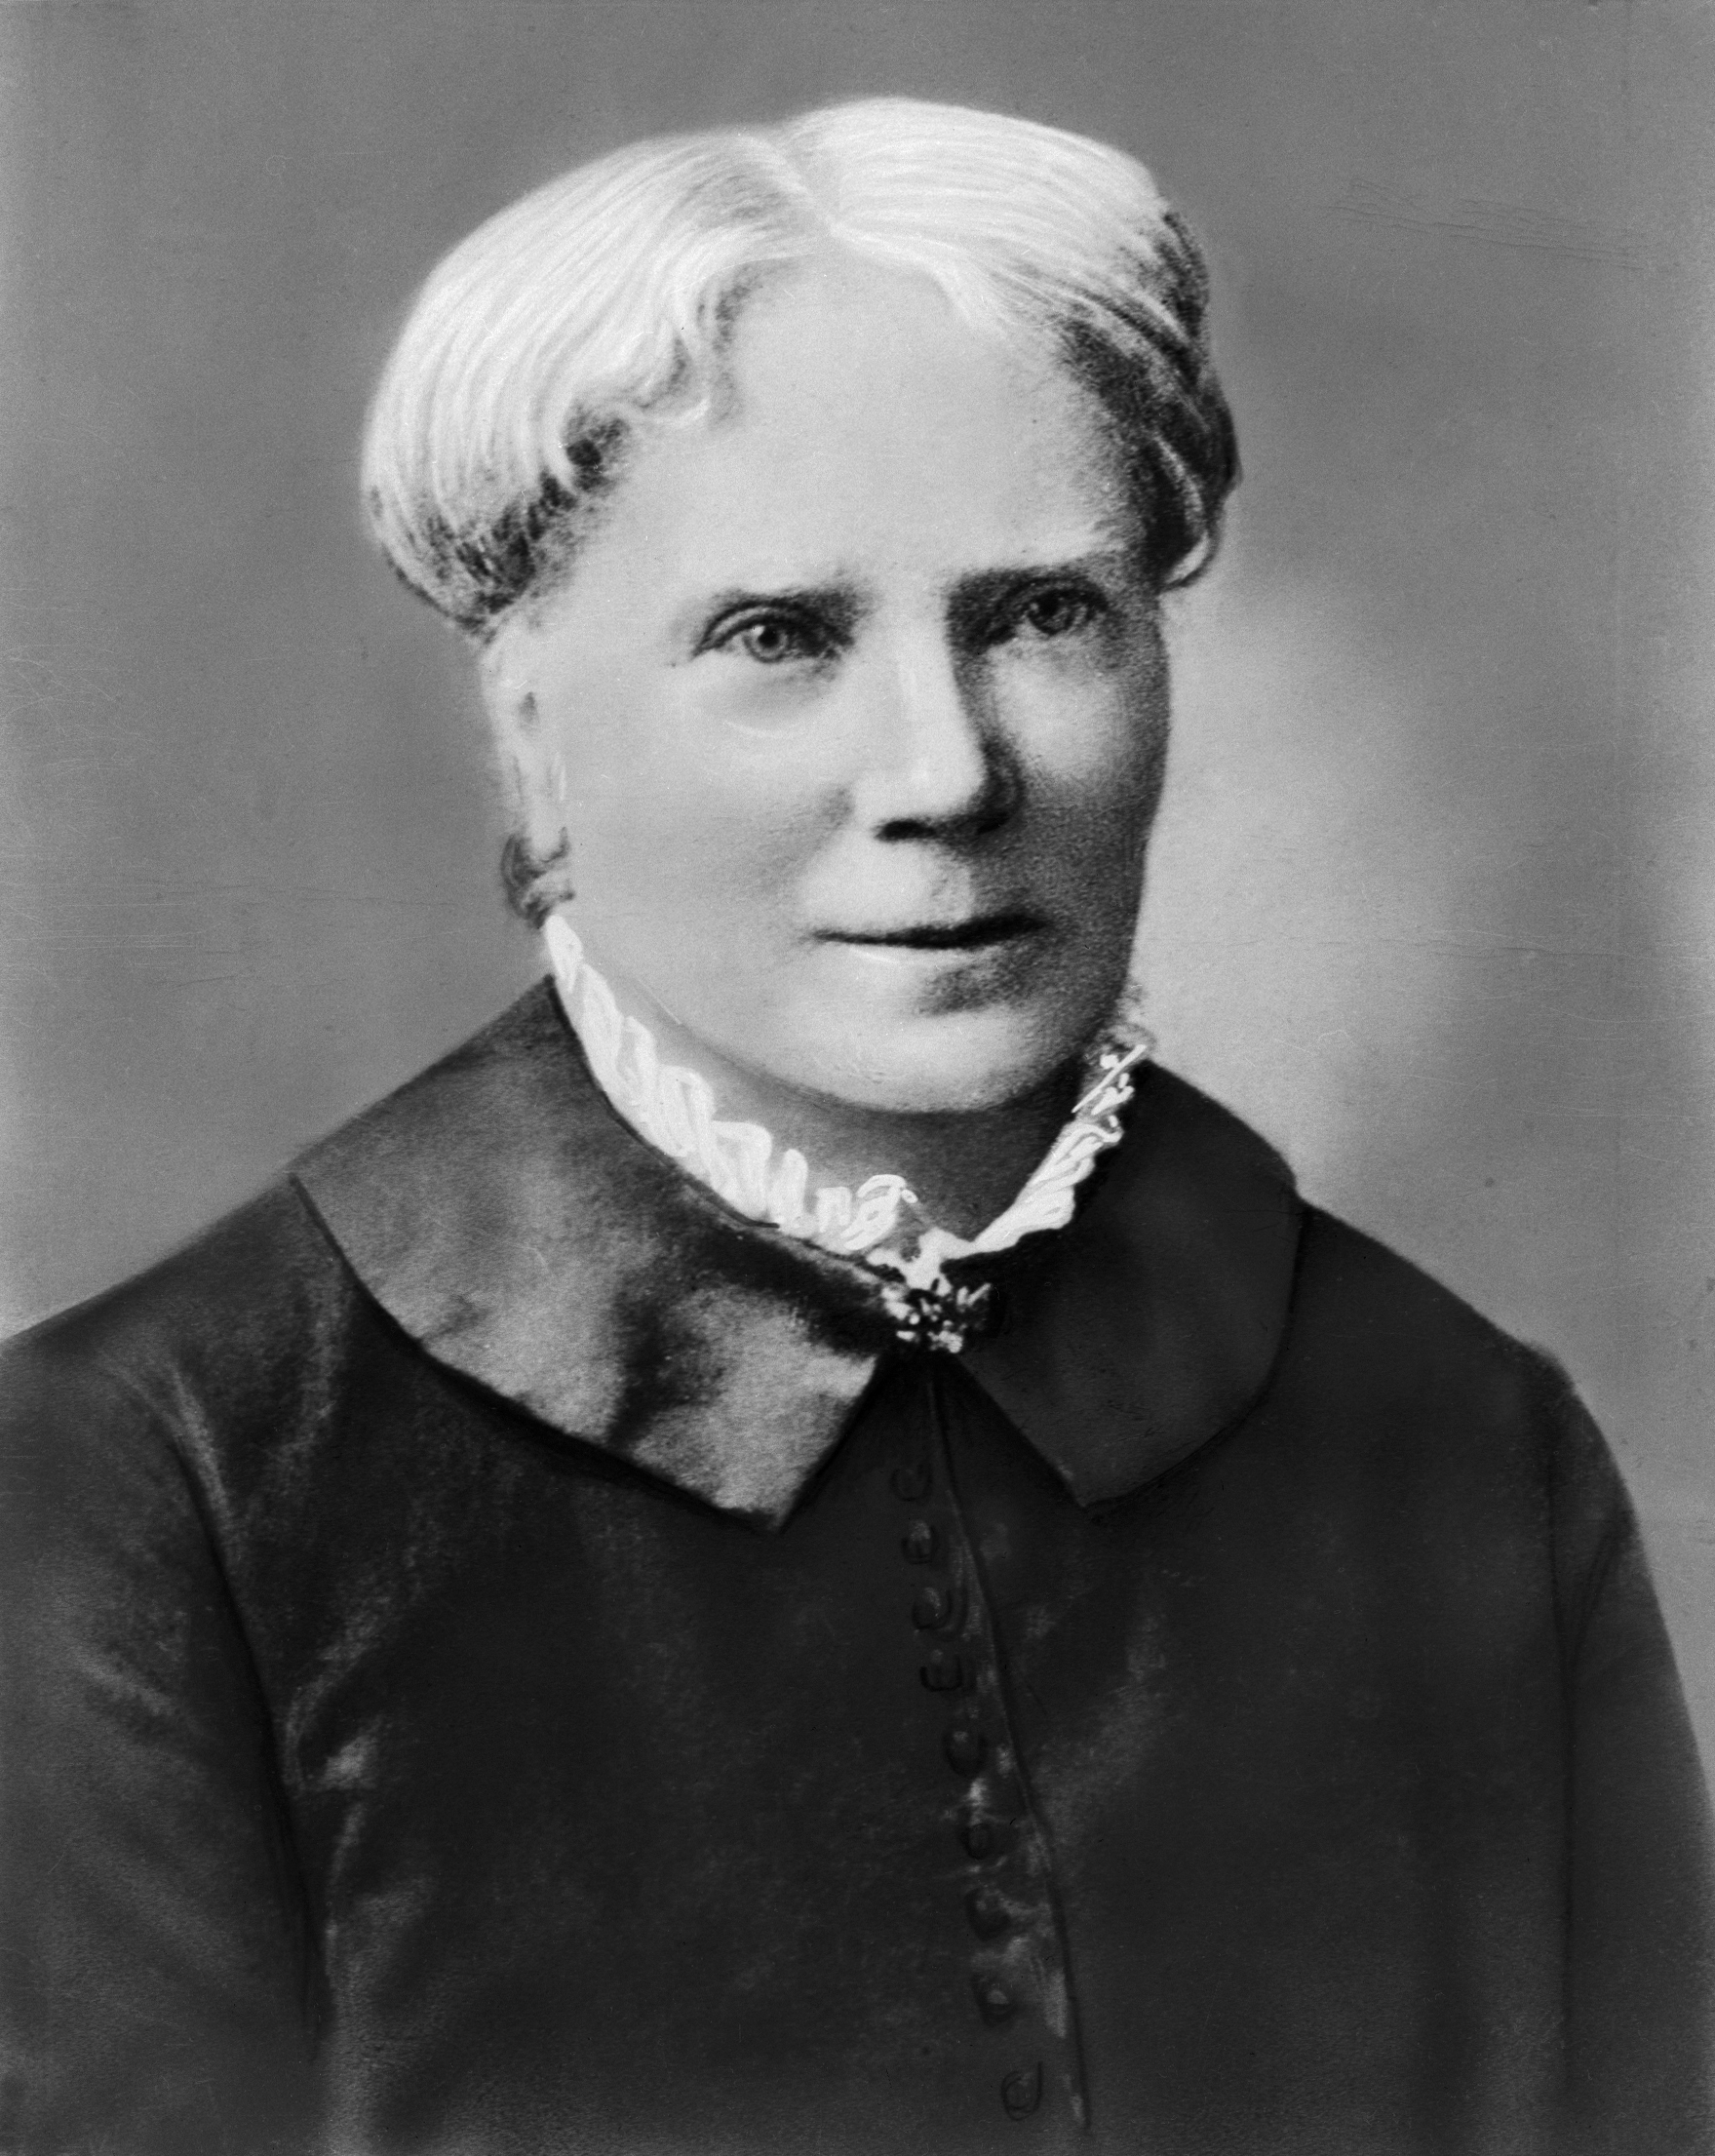 (Original Caption) Head and shoulders portrait of Elizabeth Blackwell (1821-1910), the first woman (in 1849), to receive a medical degree in the U.S. Undated photograph. (Bettmann—Bettmann Archive)